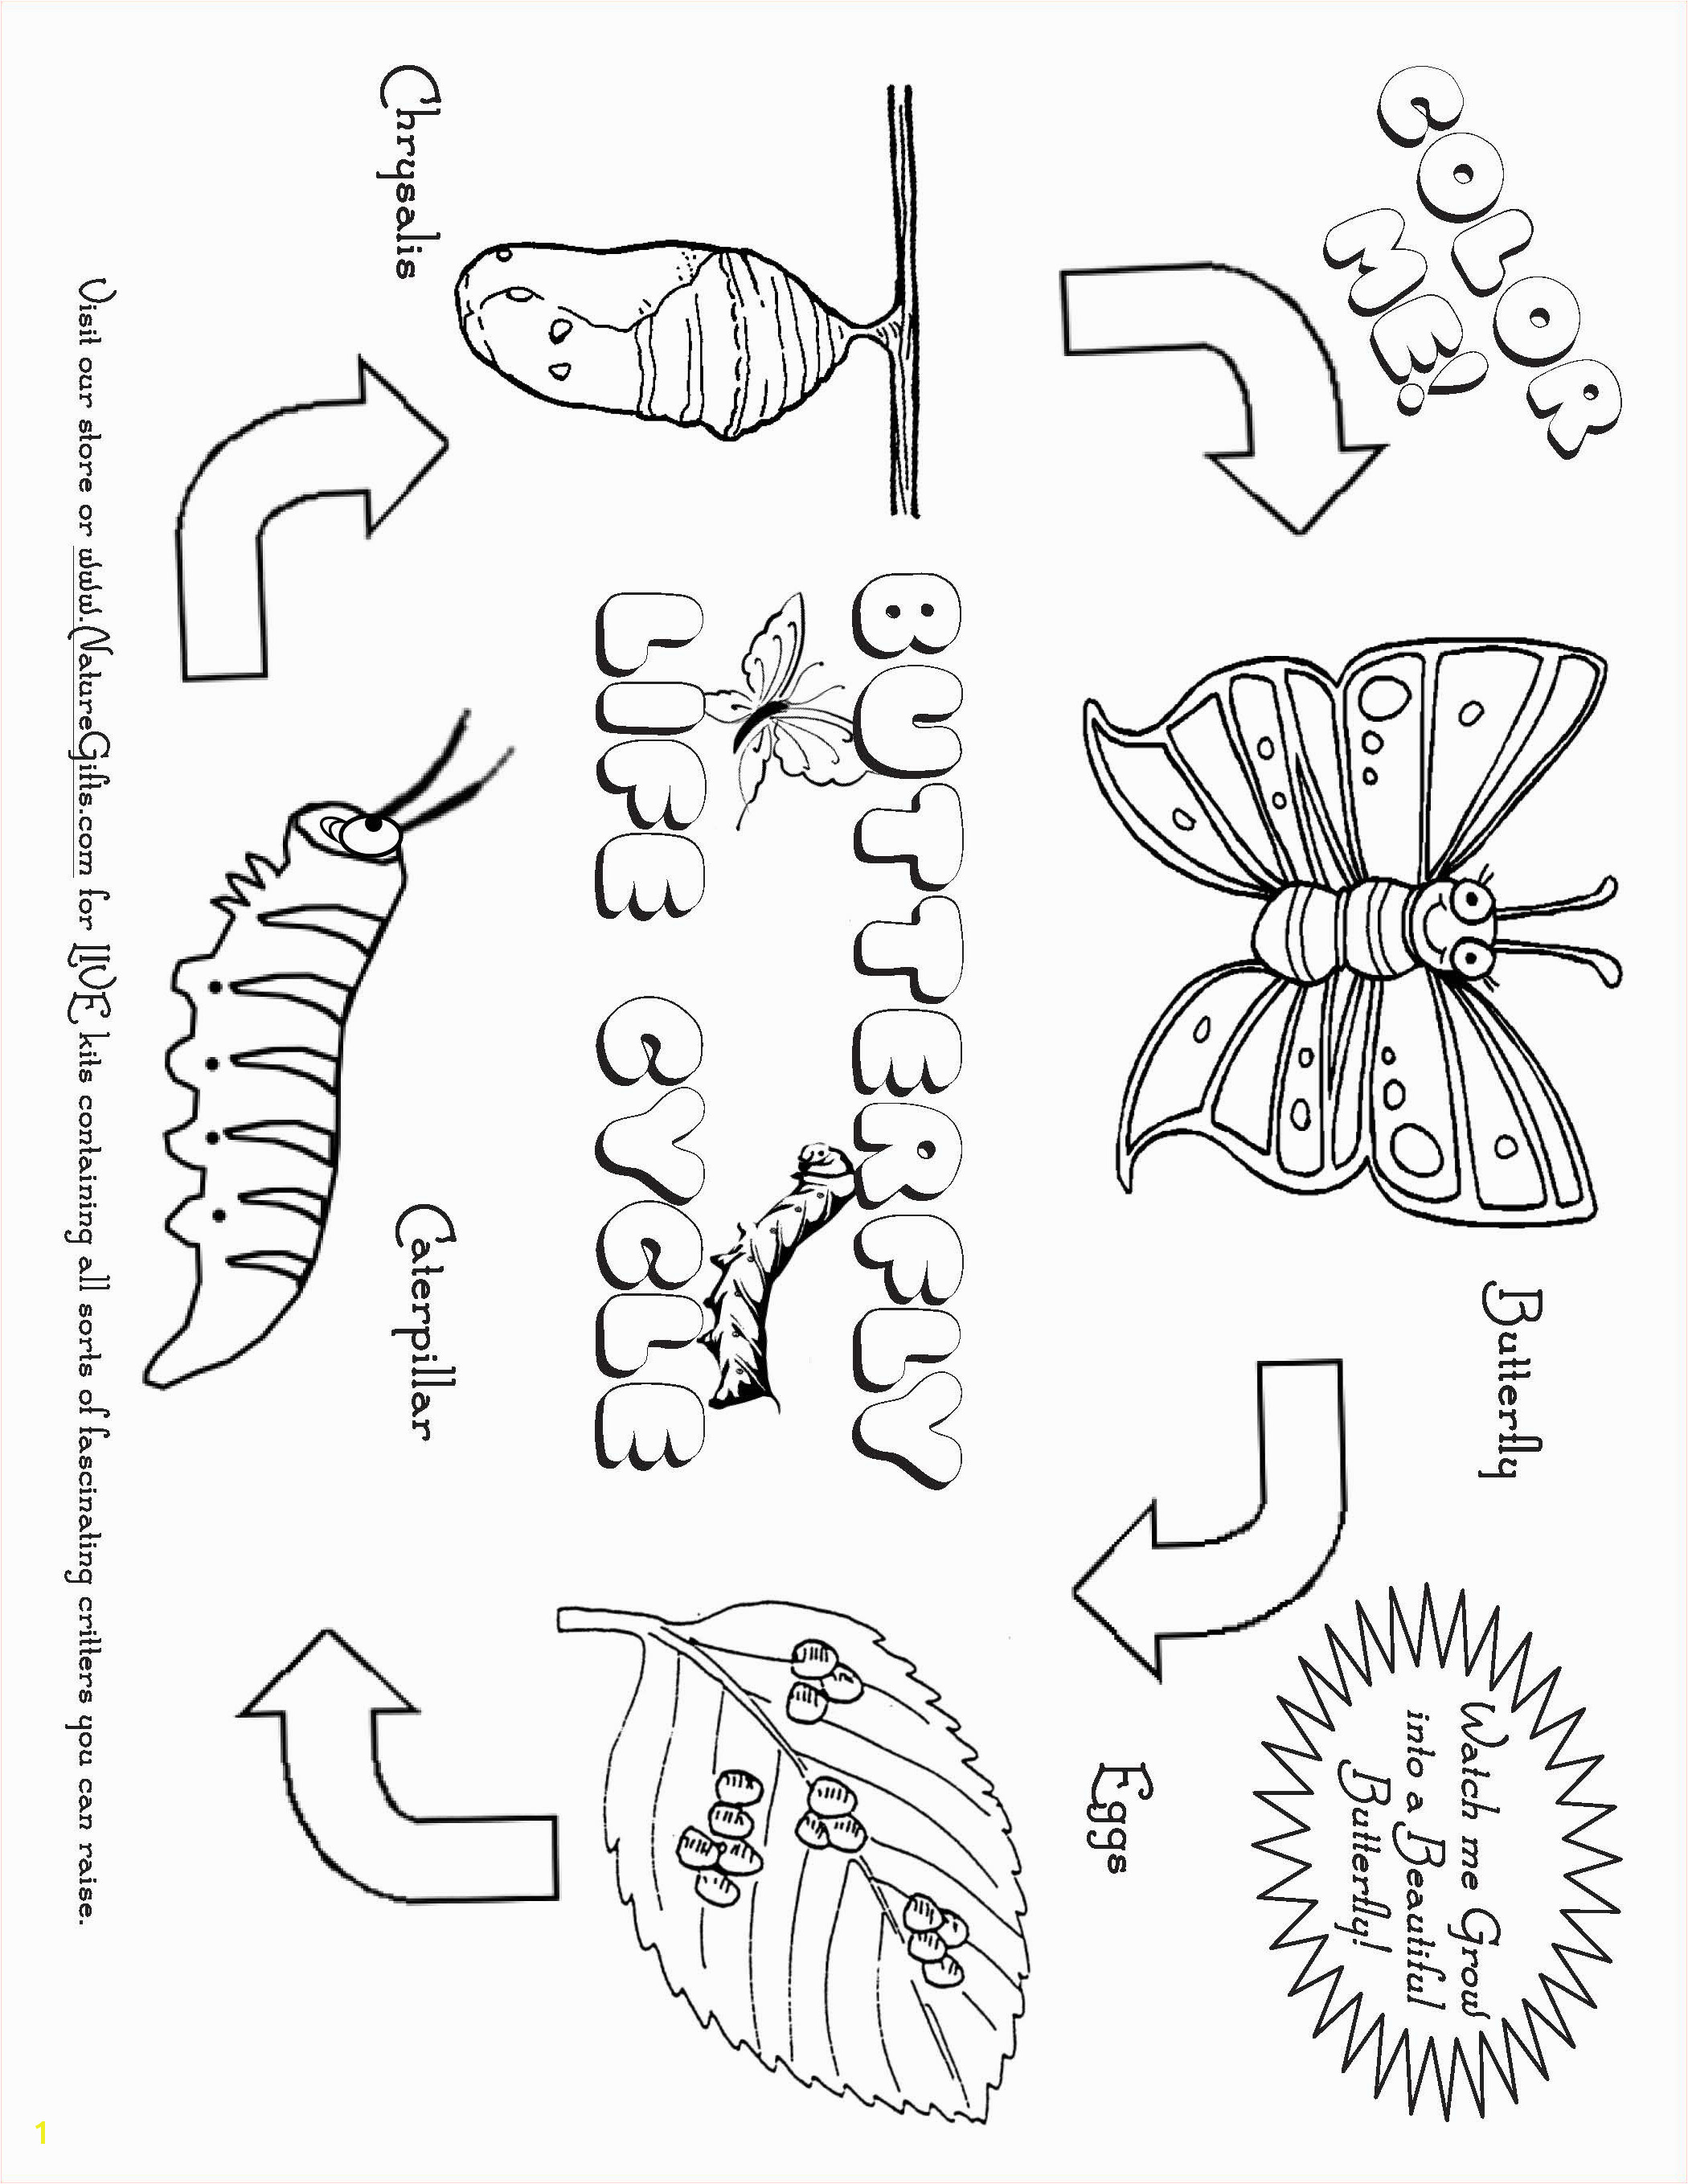 Butterfly Life Cycle Return to Butterfly Coloring Pages and Activities